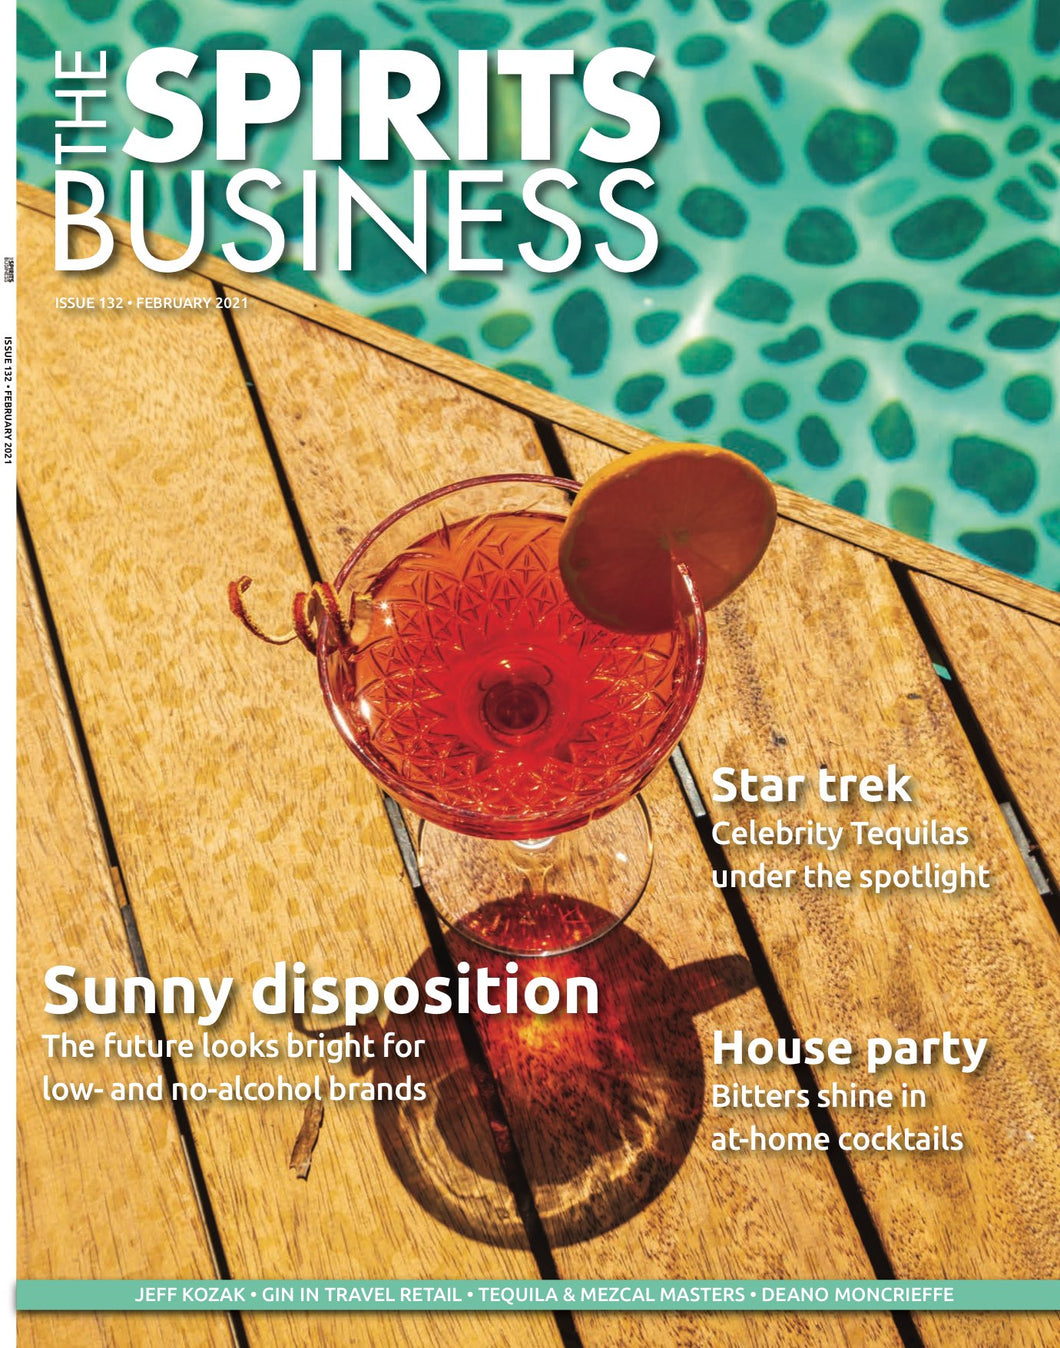 The Spirits Business - February 2021